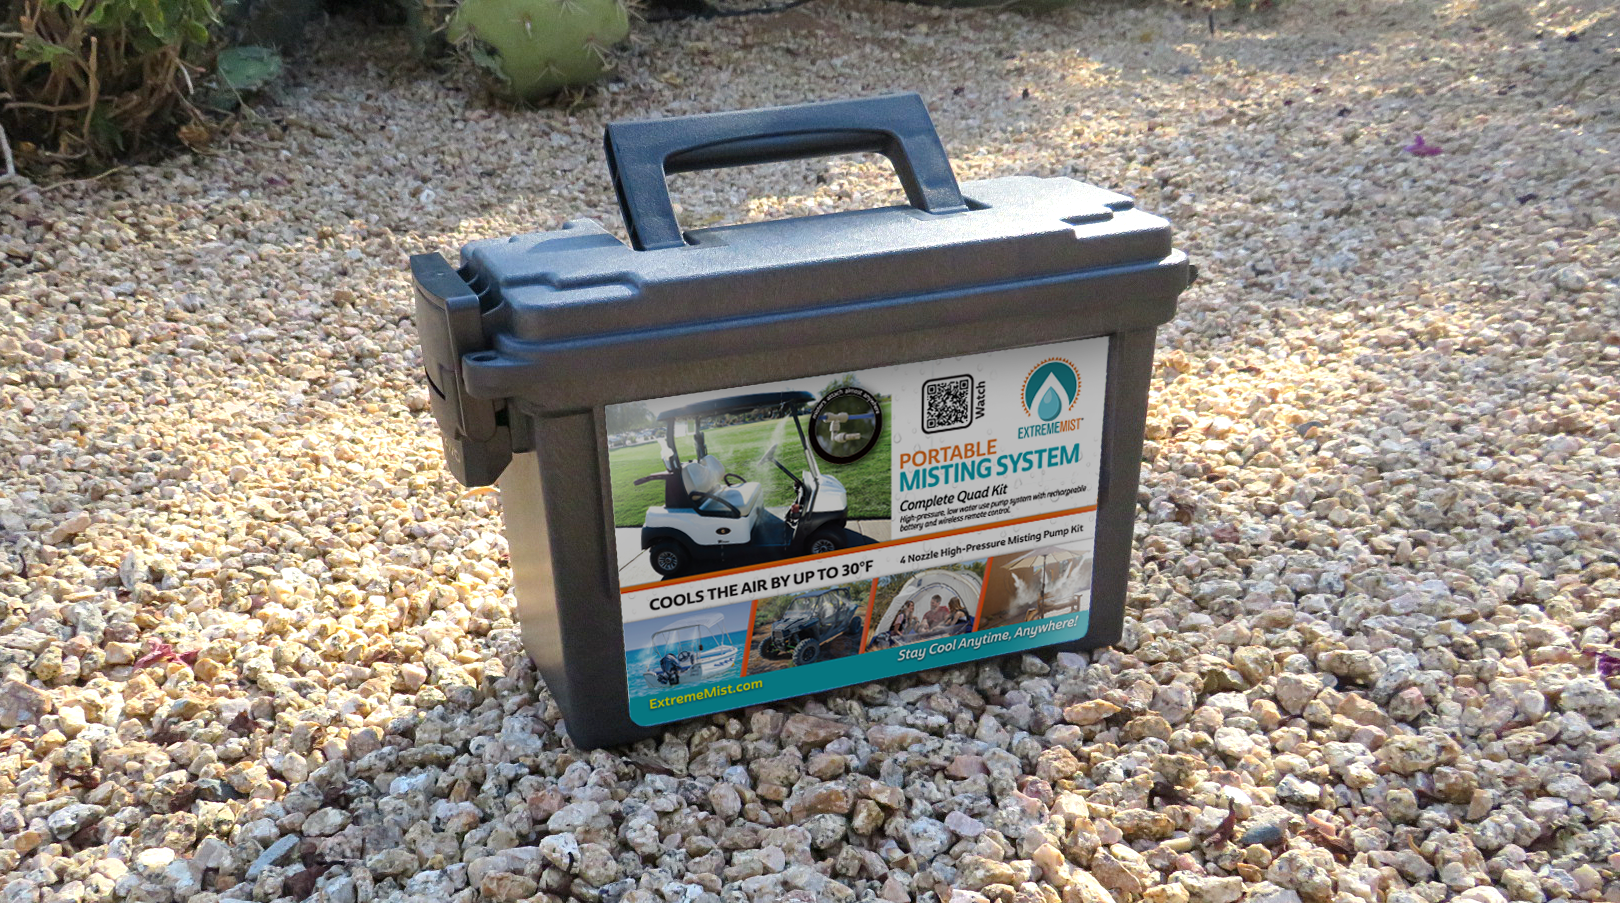 portable misting system ammo box carrying case on gravel